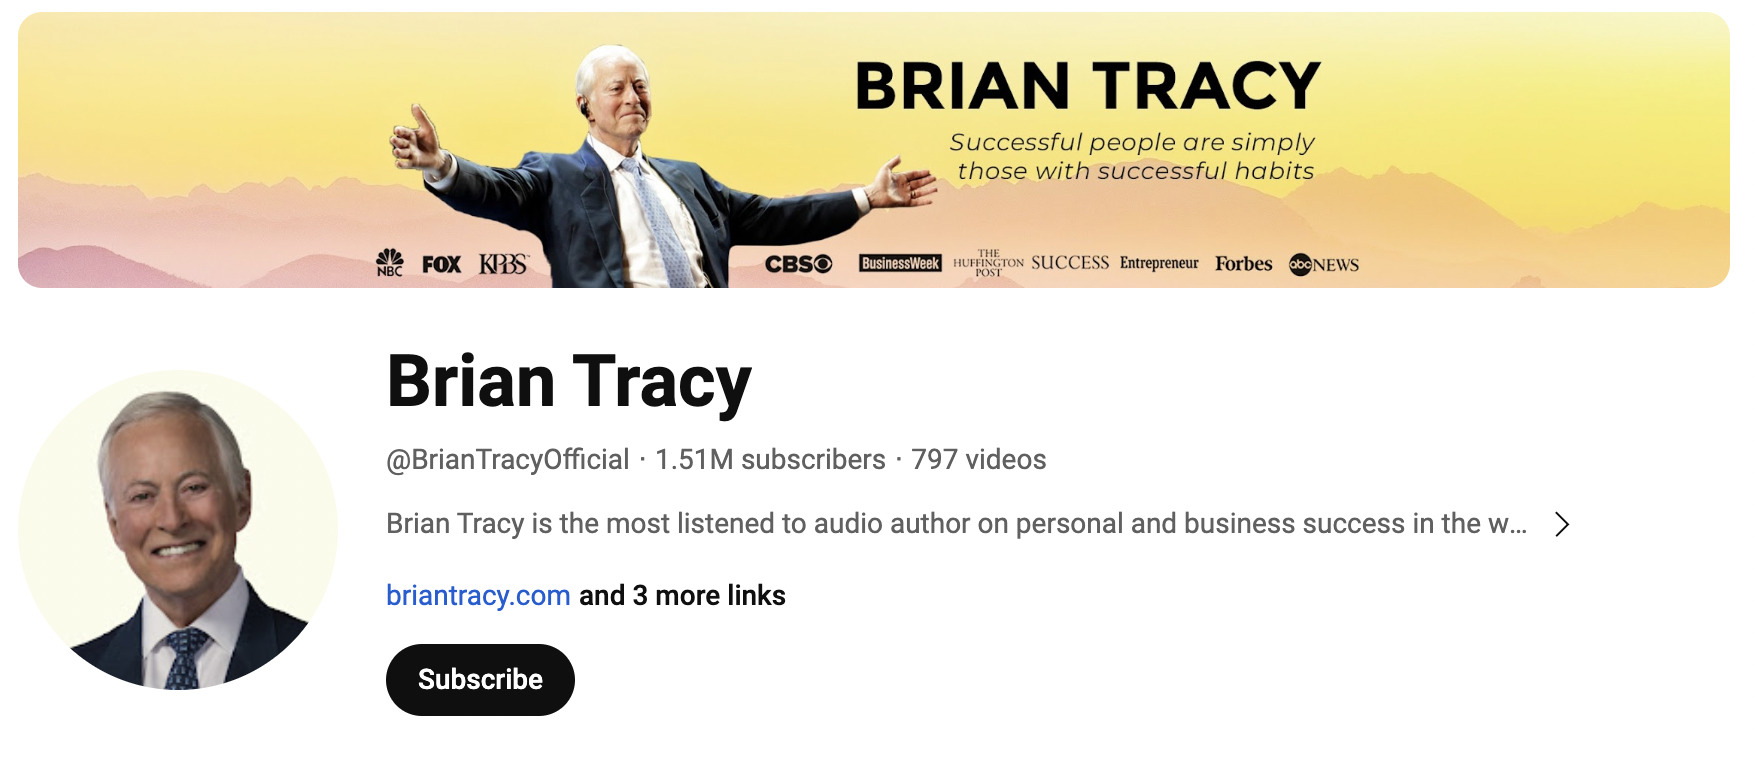 Brian Tracy YouTube channel